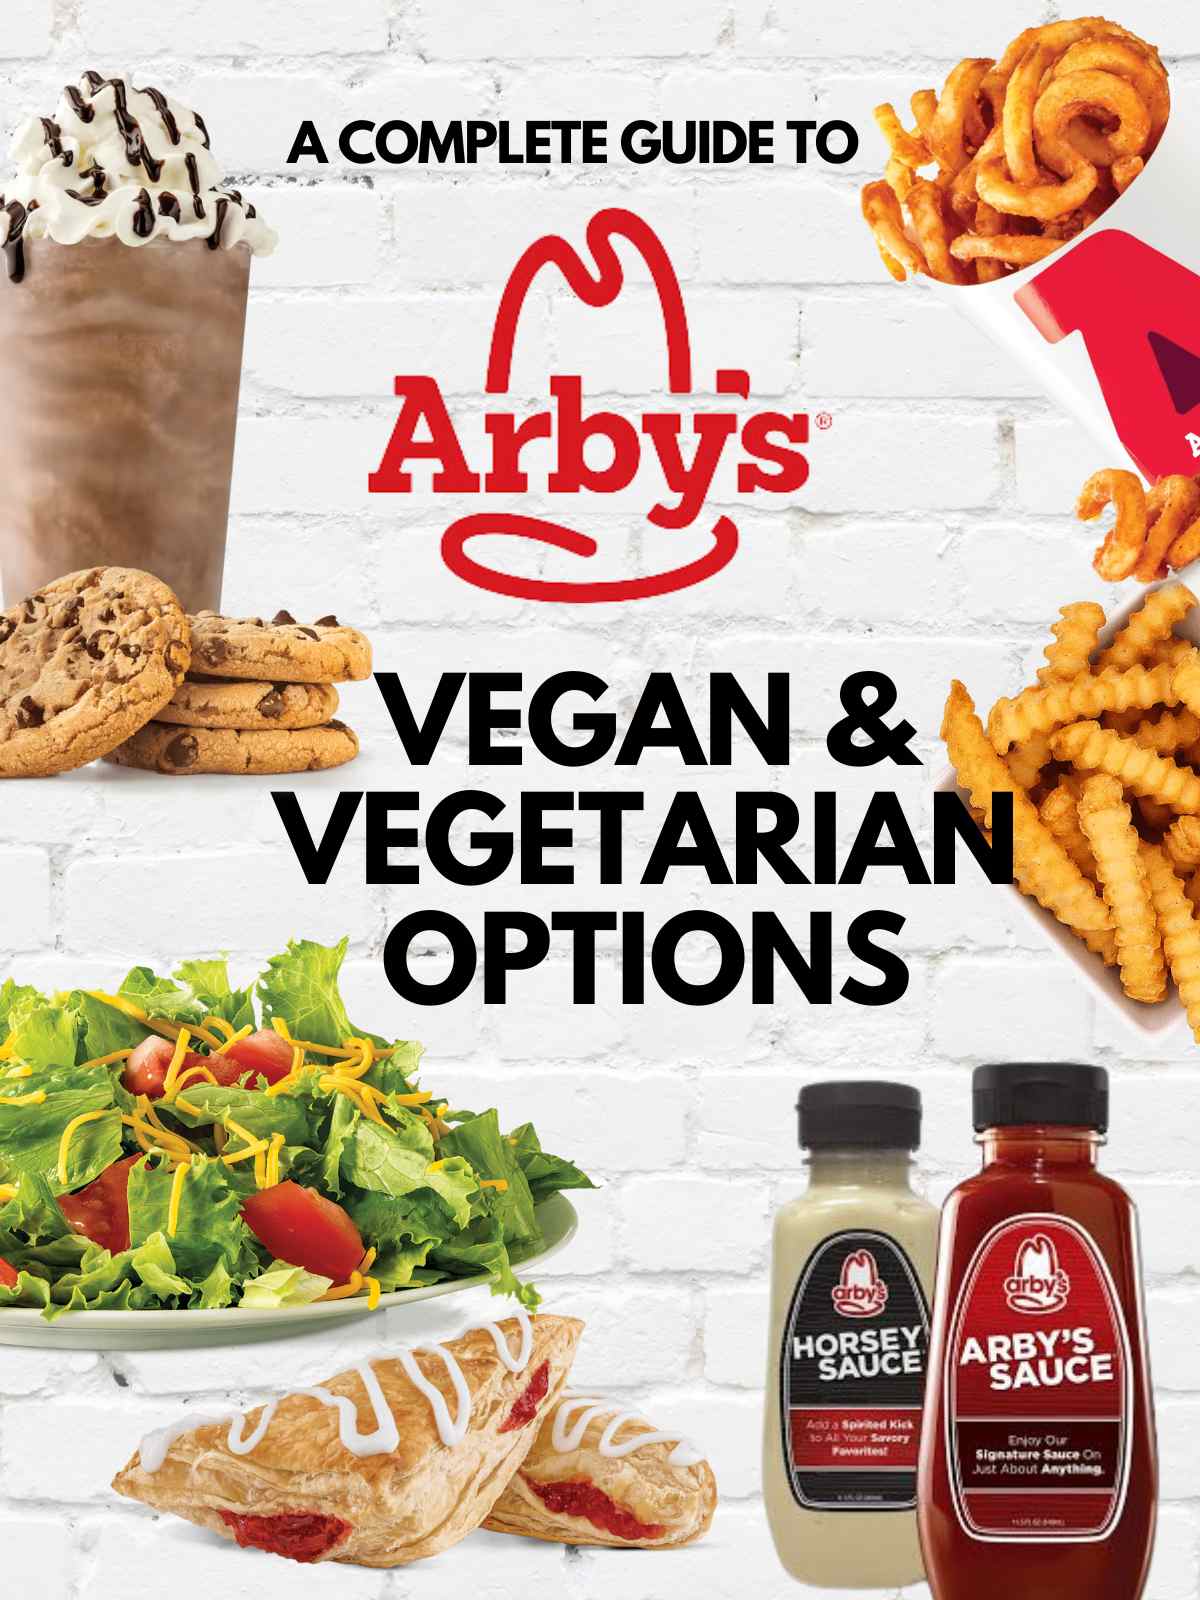 Arby's vegan and vegetarian options banner with images.